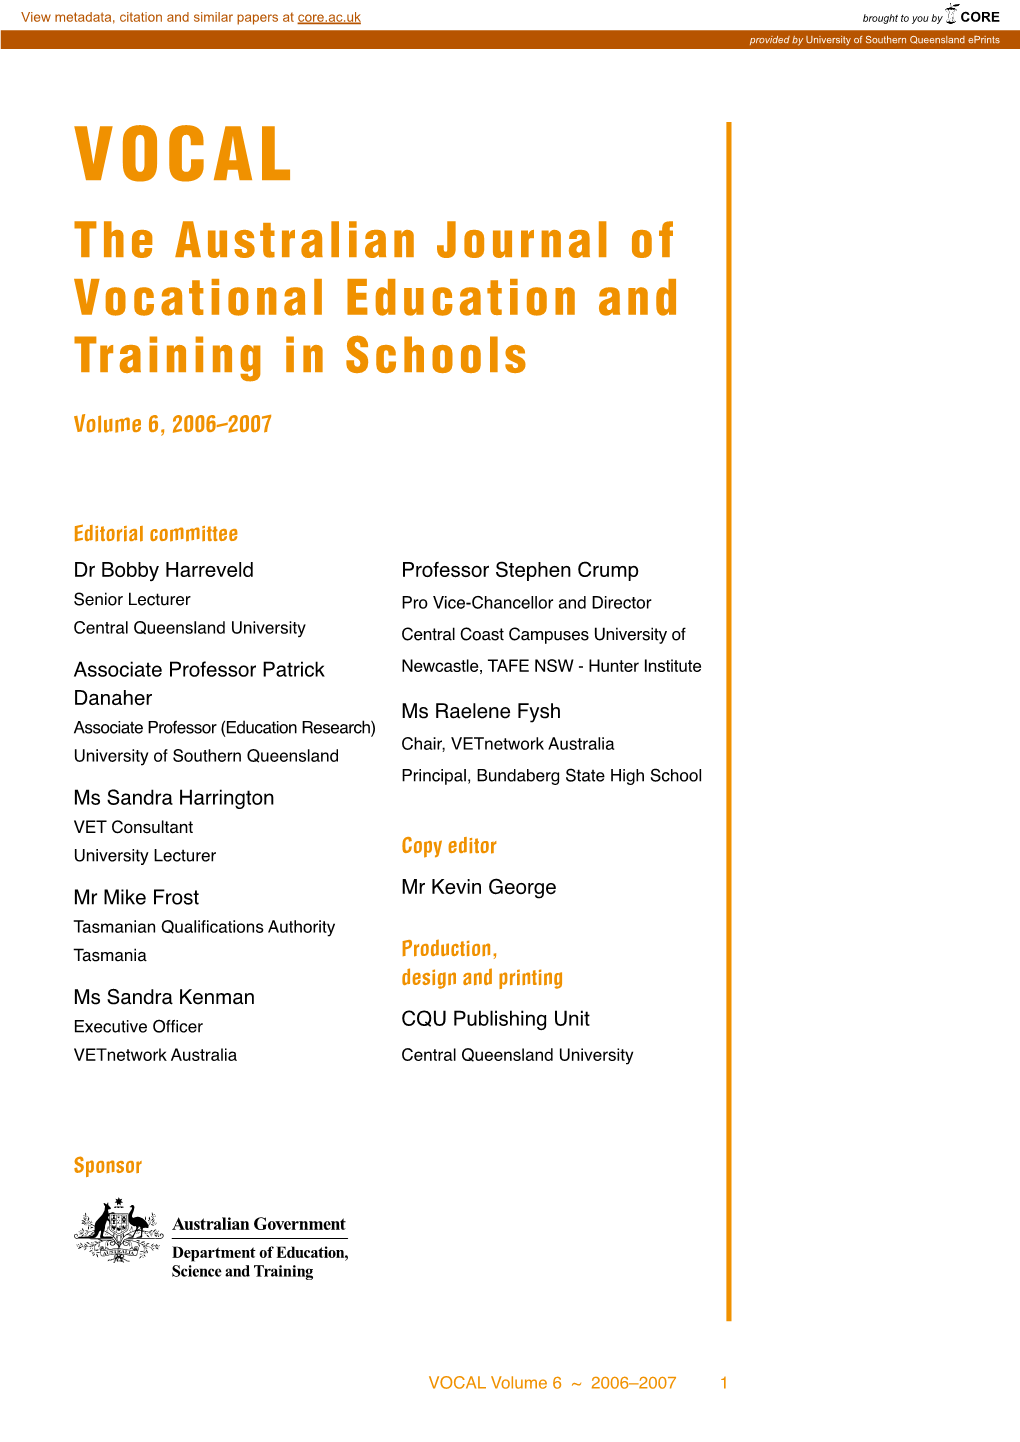 The Australian Journal of Vocational Education and Training in Schools